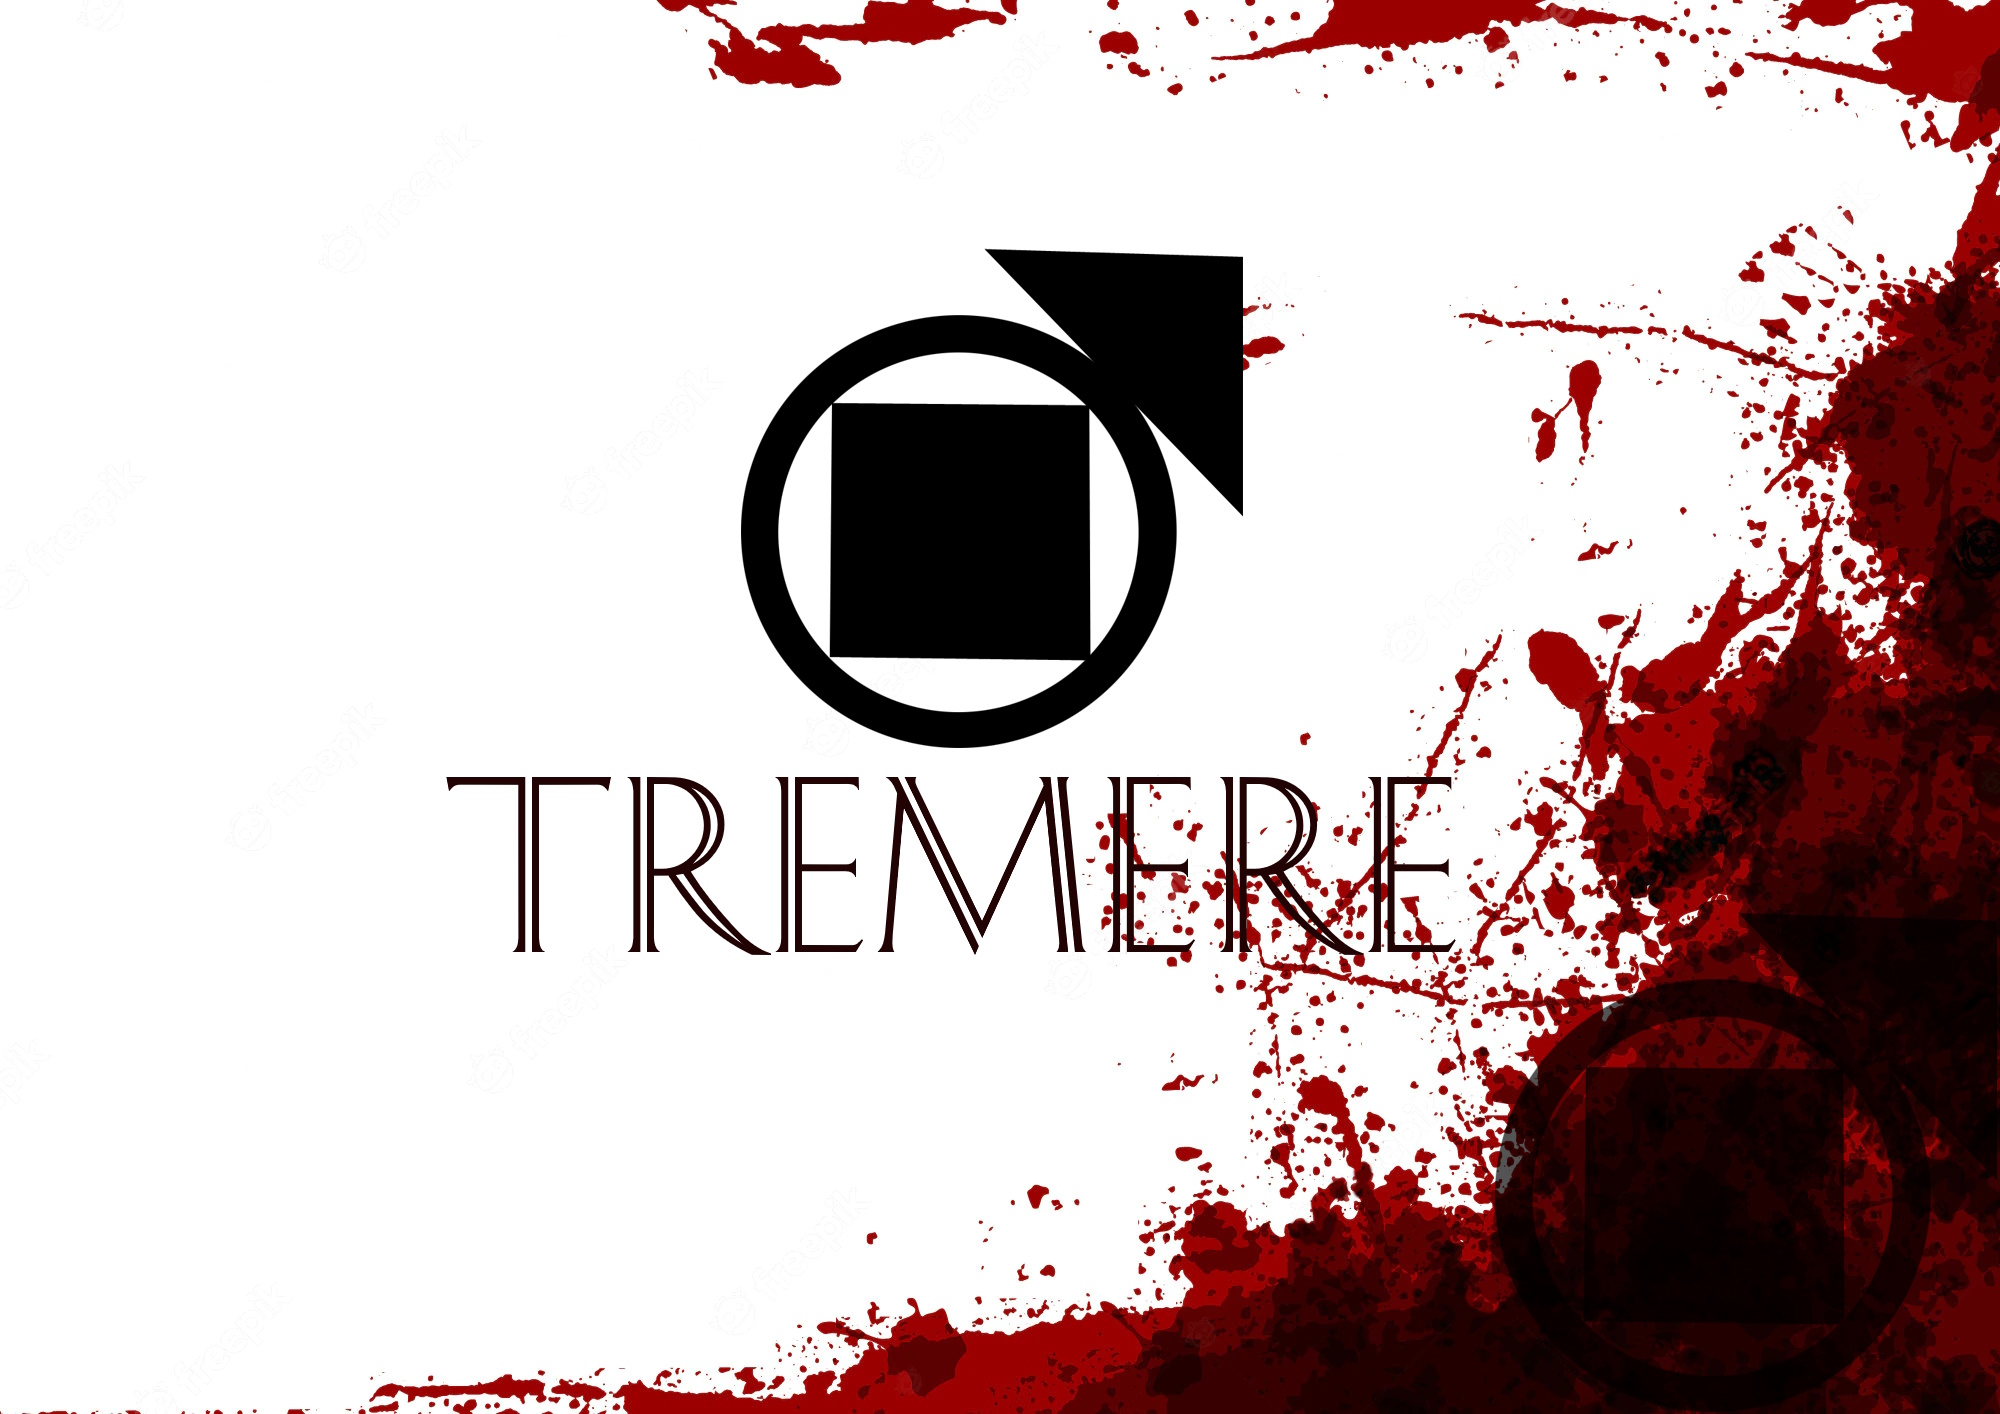 Tremere: Trials and Tribulations